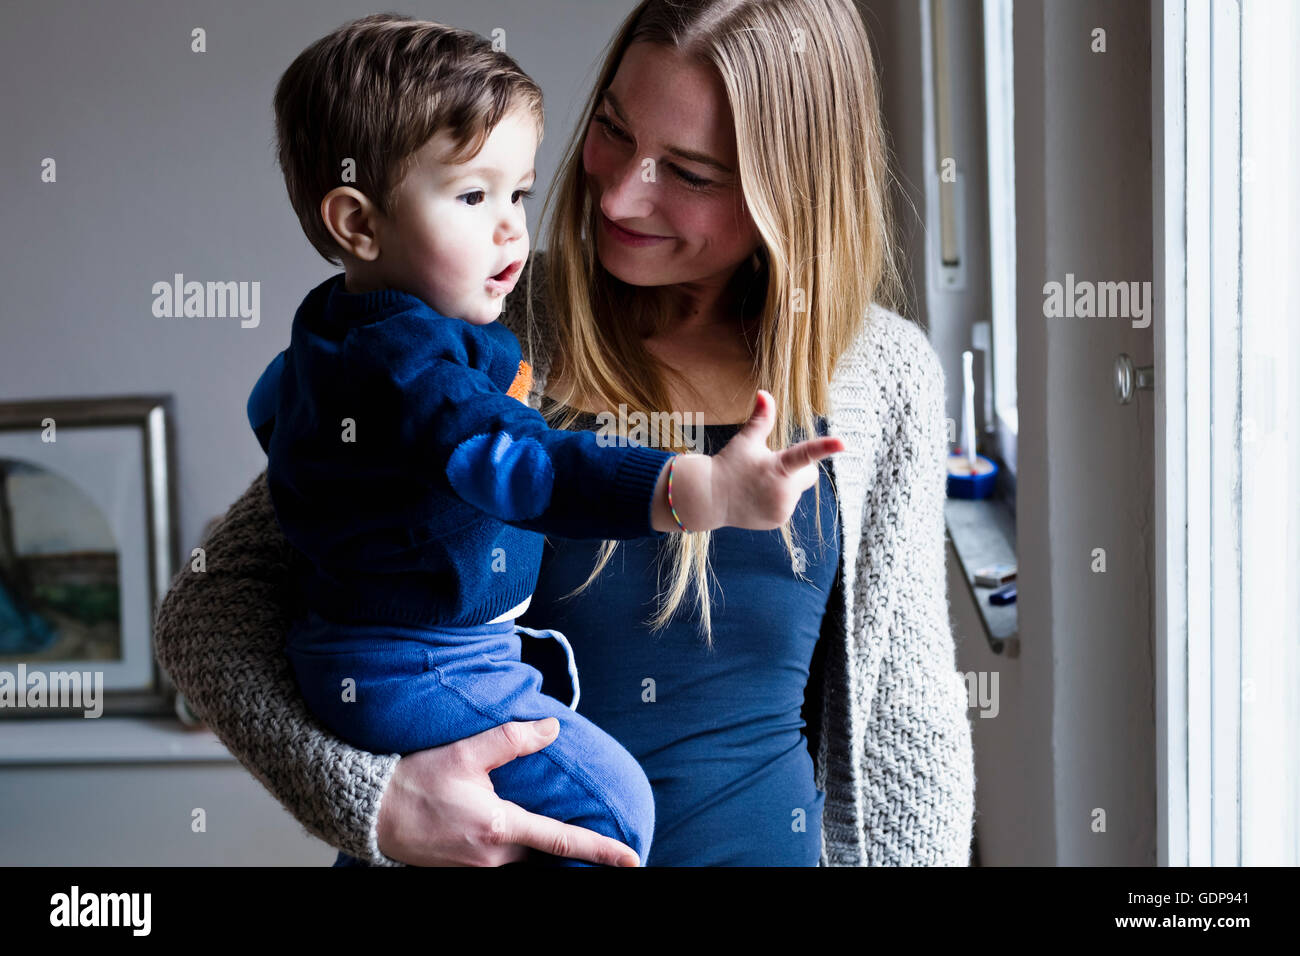 Mid adult woman carrying baby son, pointing Stock Photo